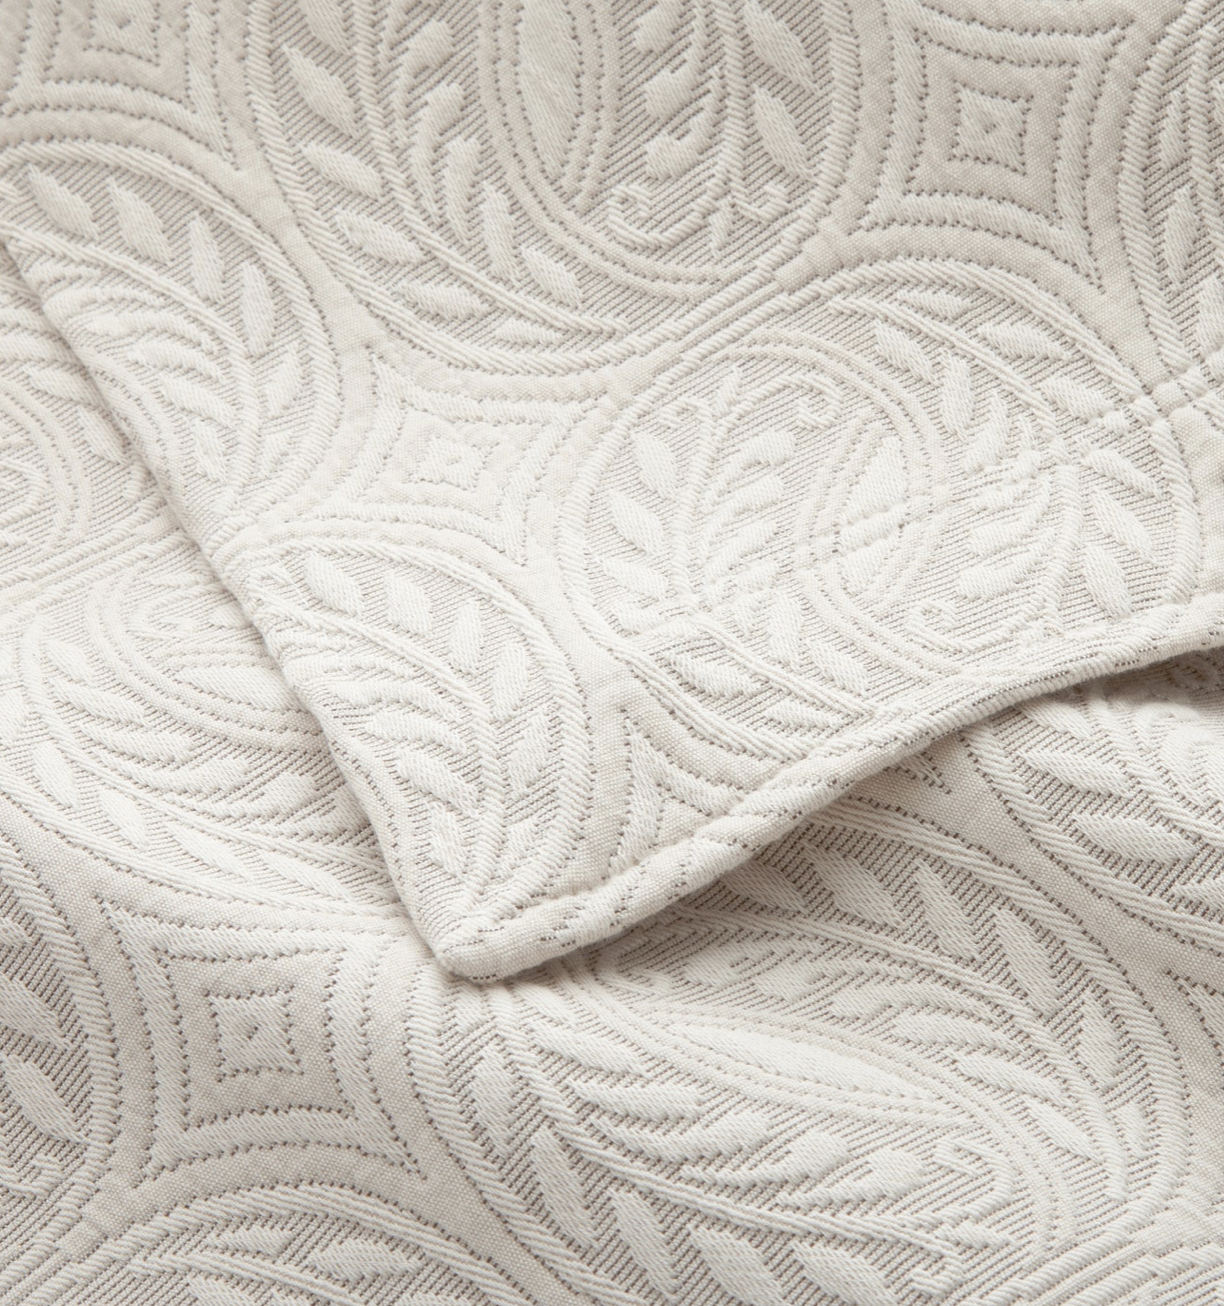 Vienna cotton coverlet by Peacock Alley